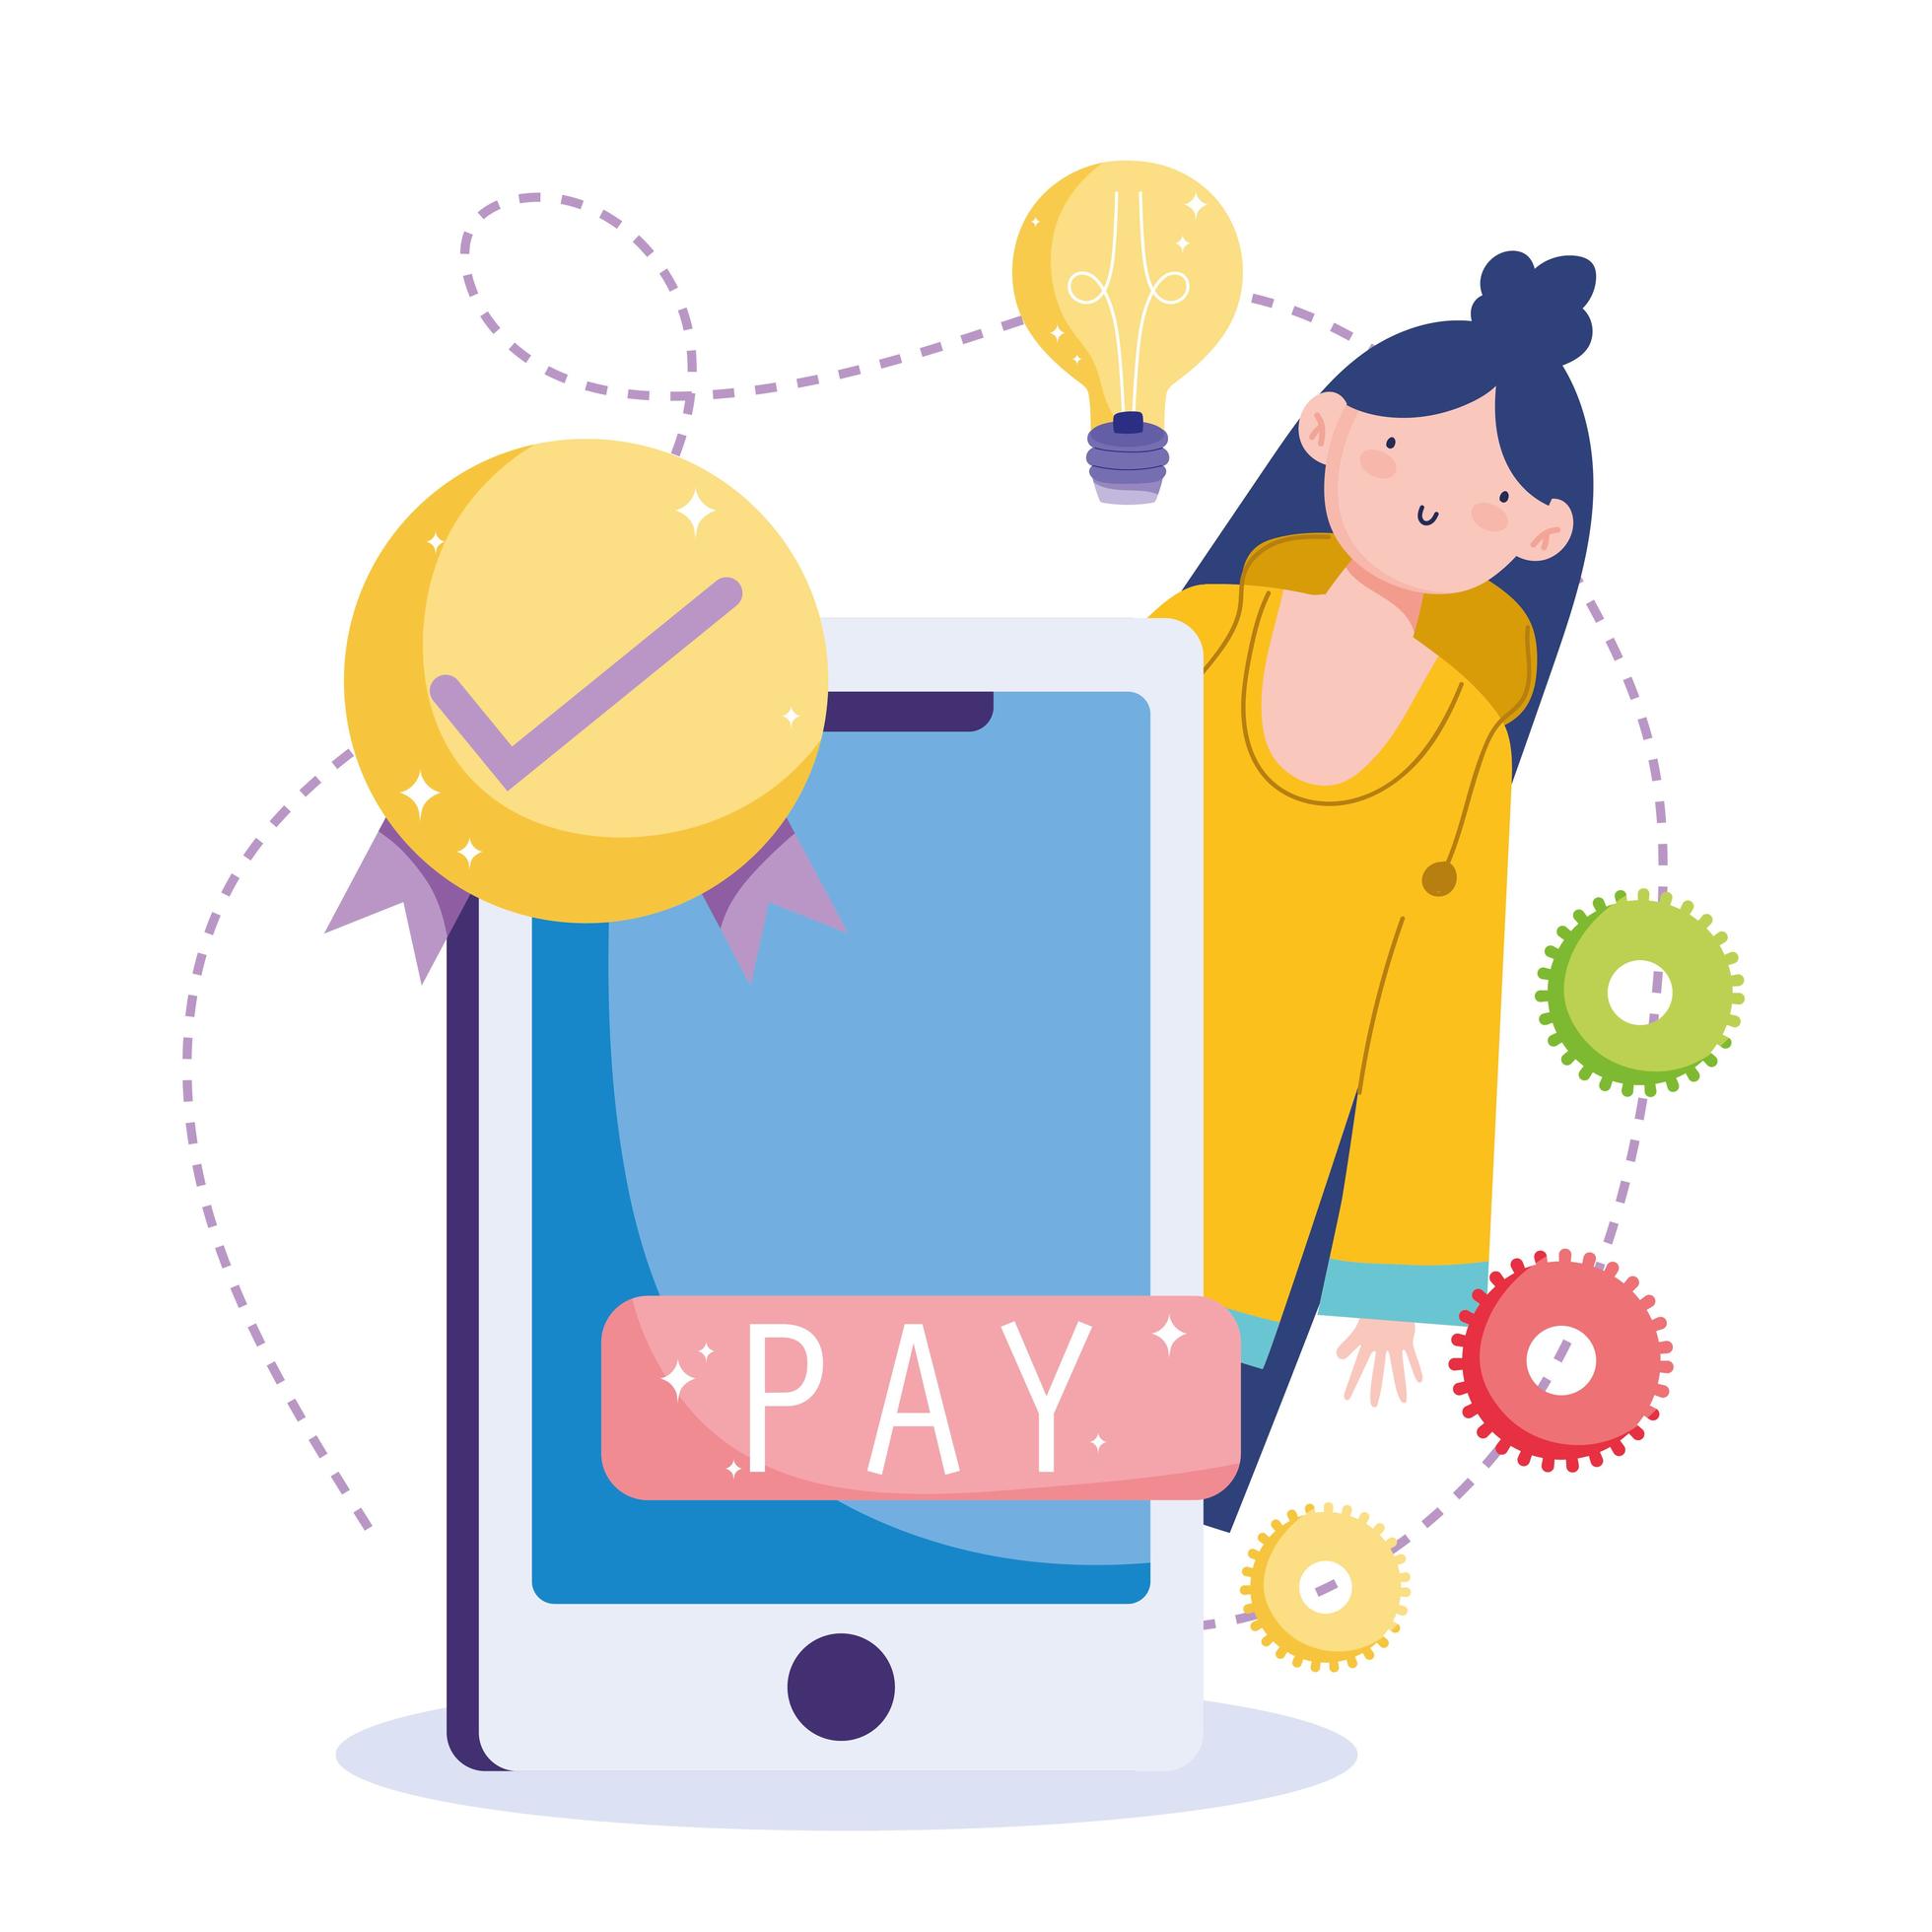 icons-and-woman-with-online-payment-concept-vector